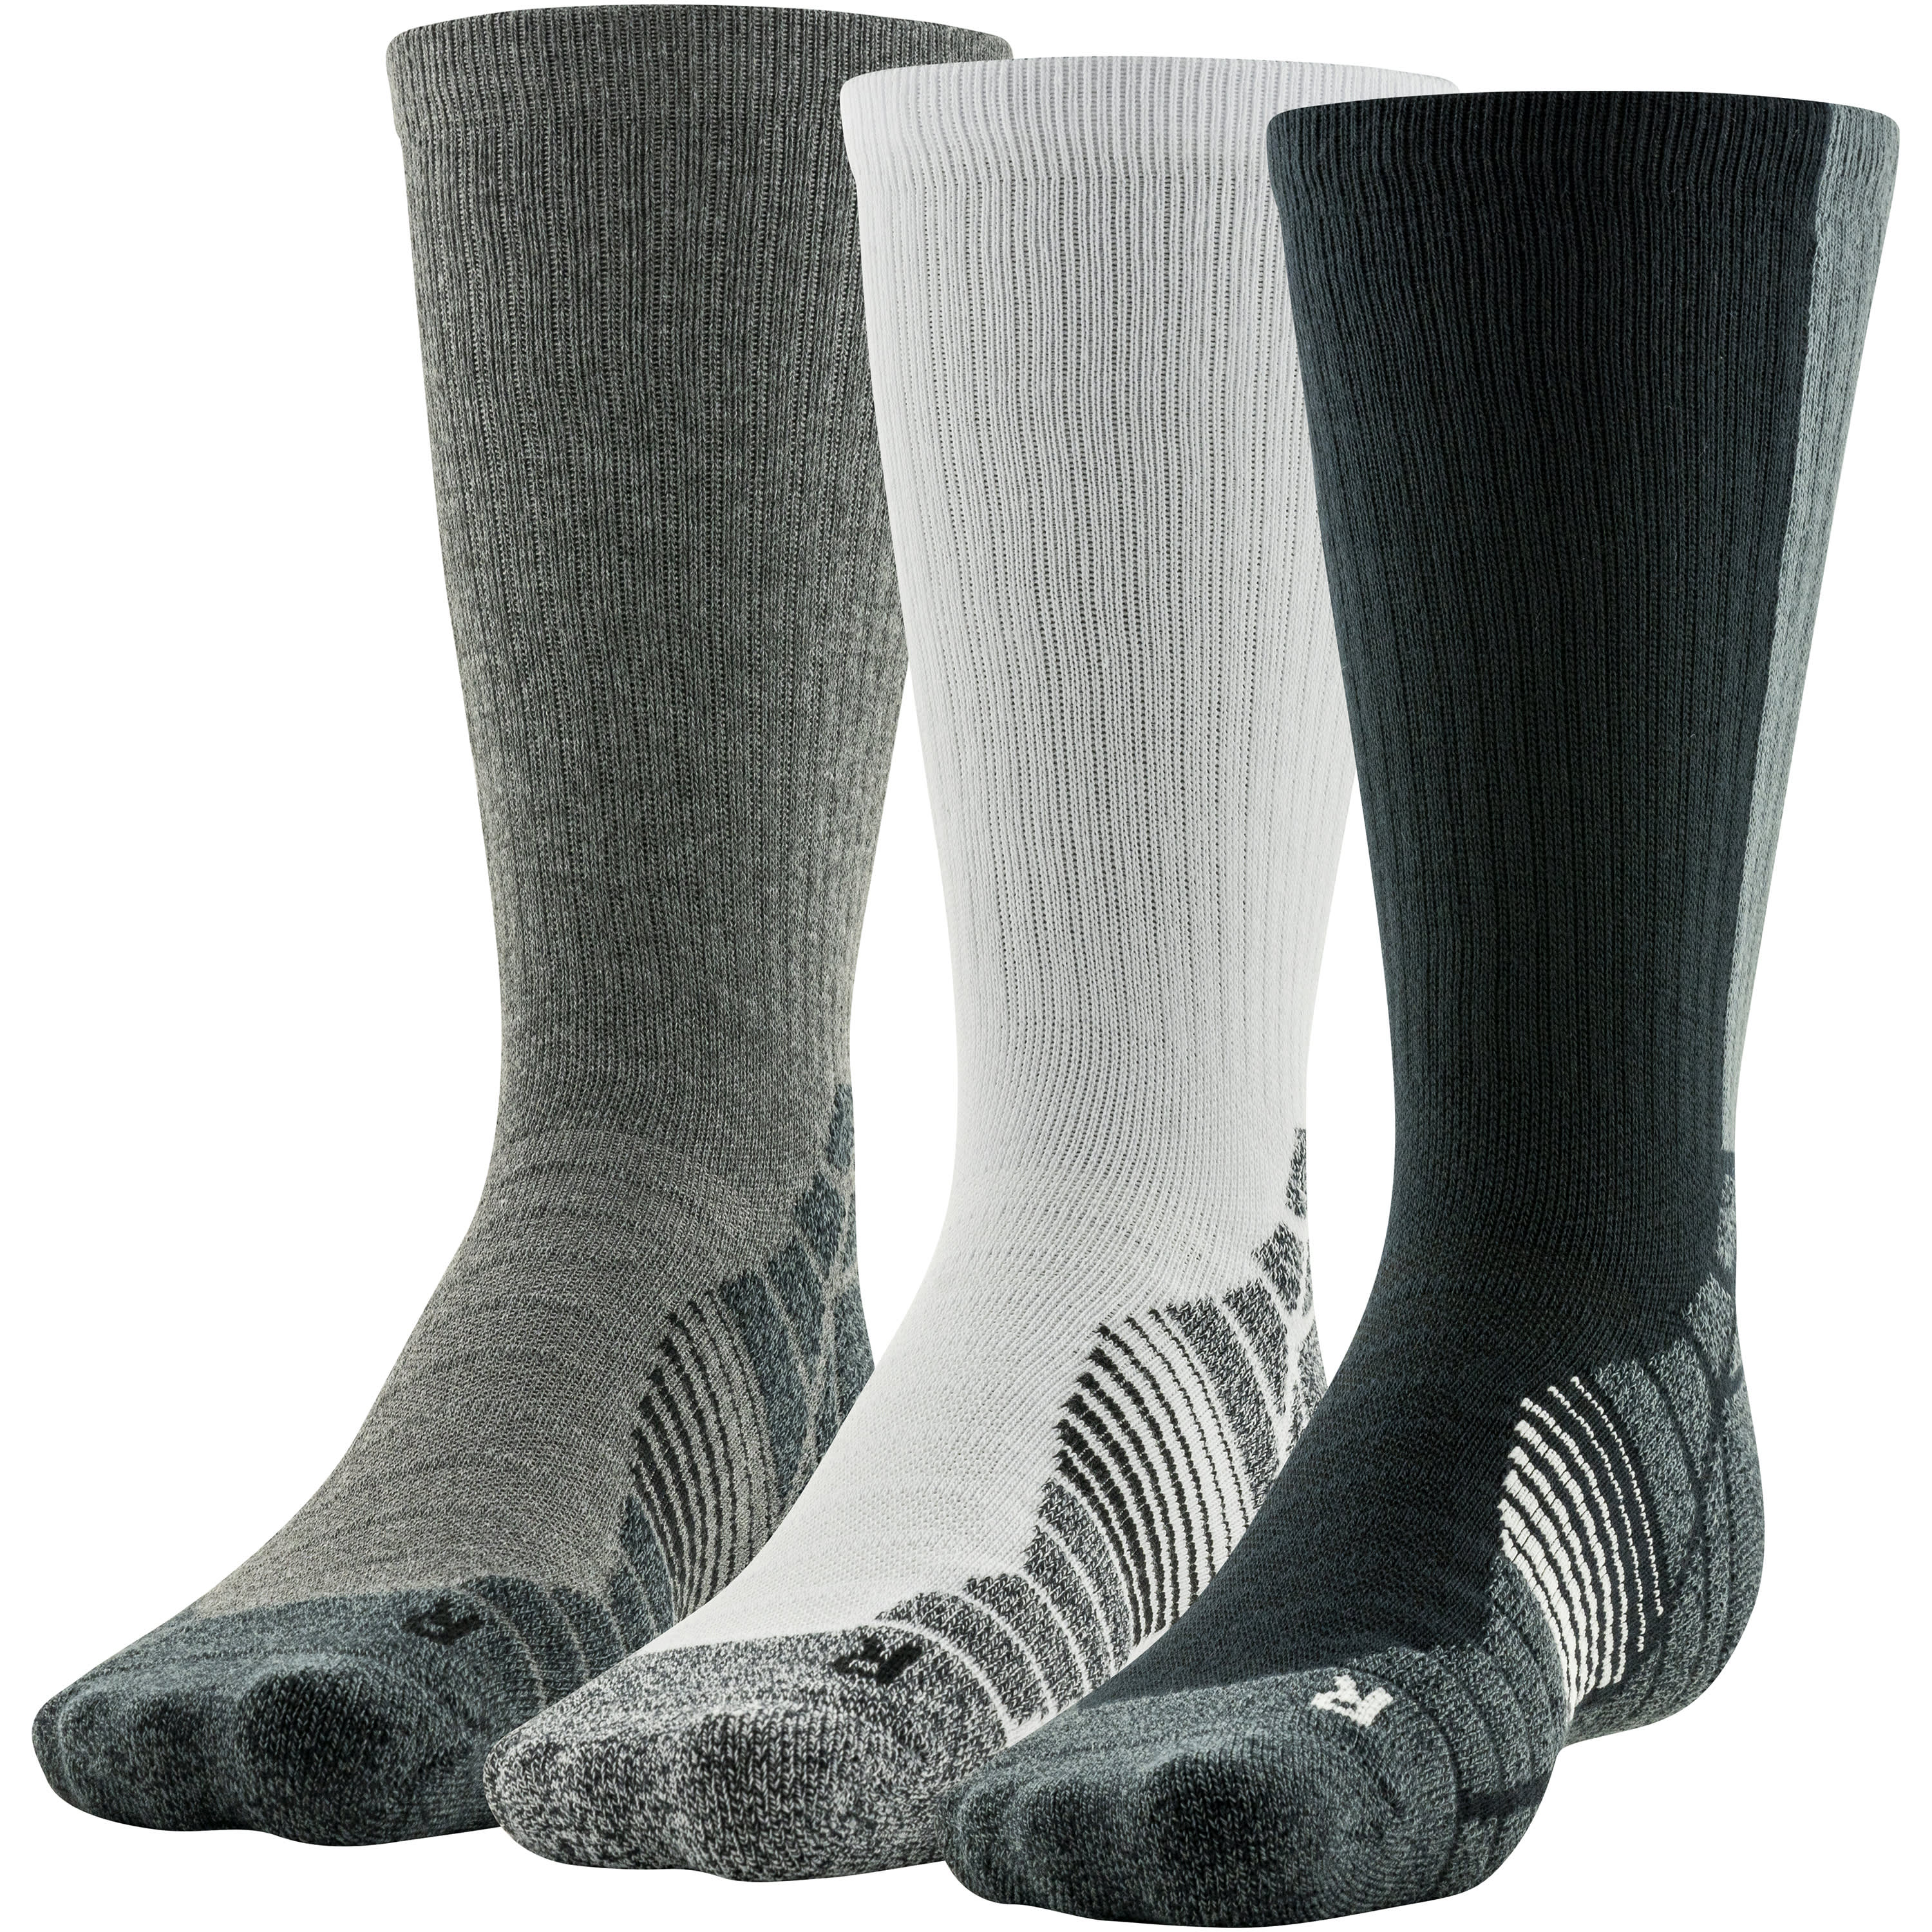 Under Armour® Men’s Elevated Novelty Crew Socks – 3-Pack